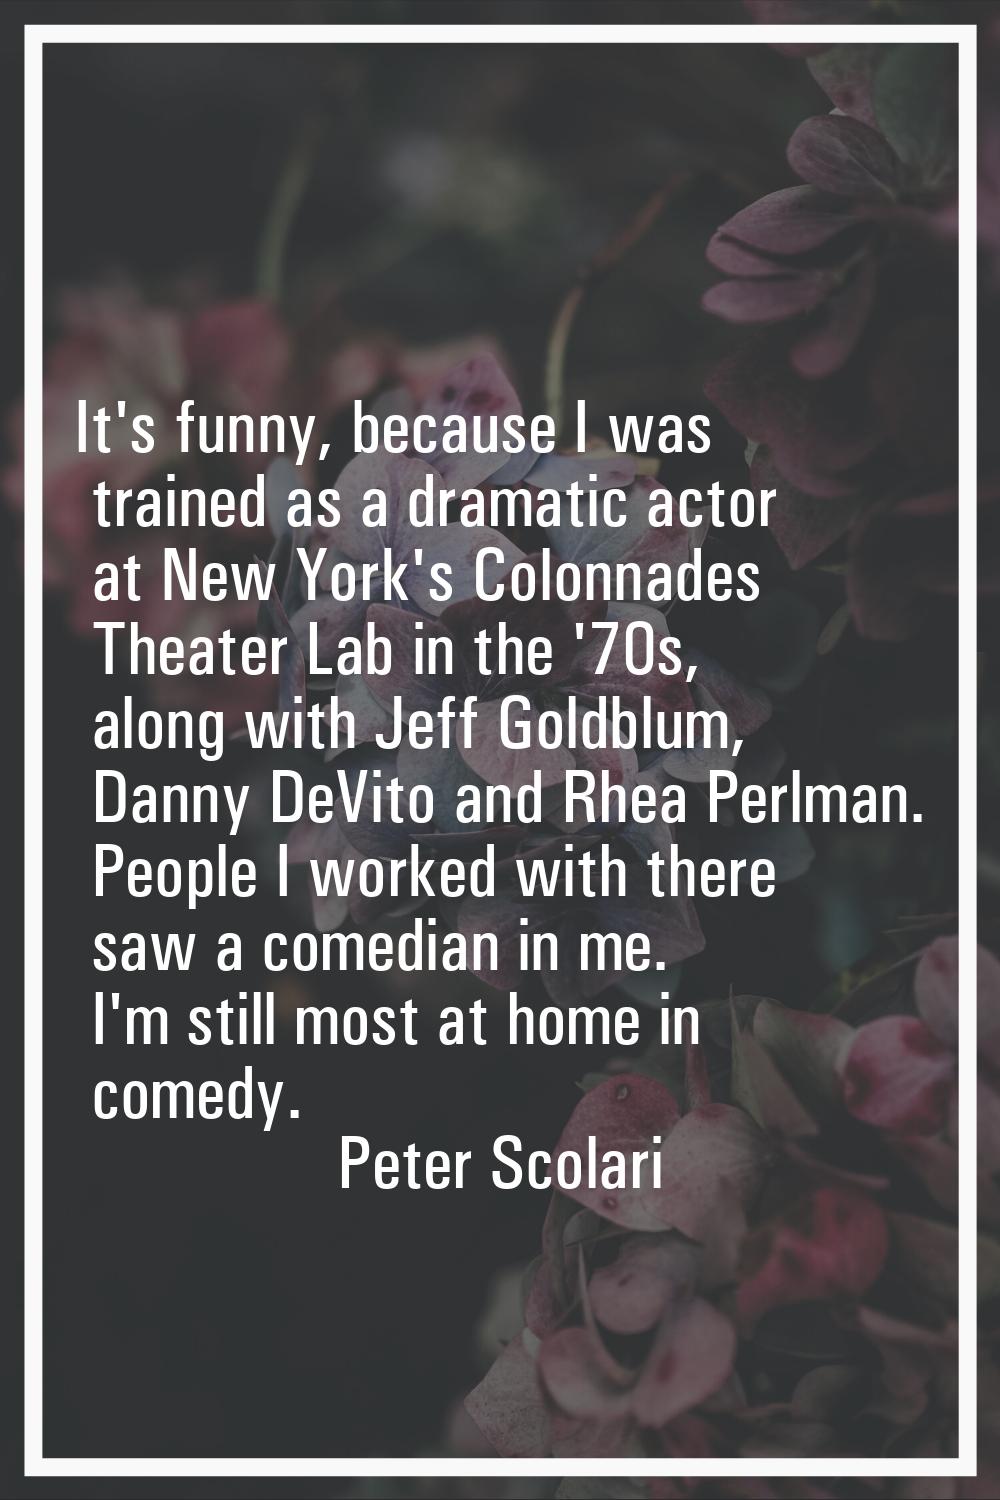 It's funny, because I was trained as a dramatic actor at New York's Colonnades Theater Lab in the '